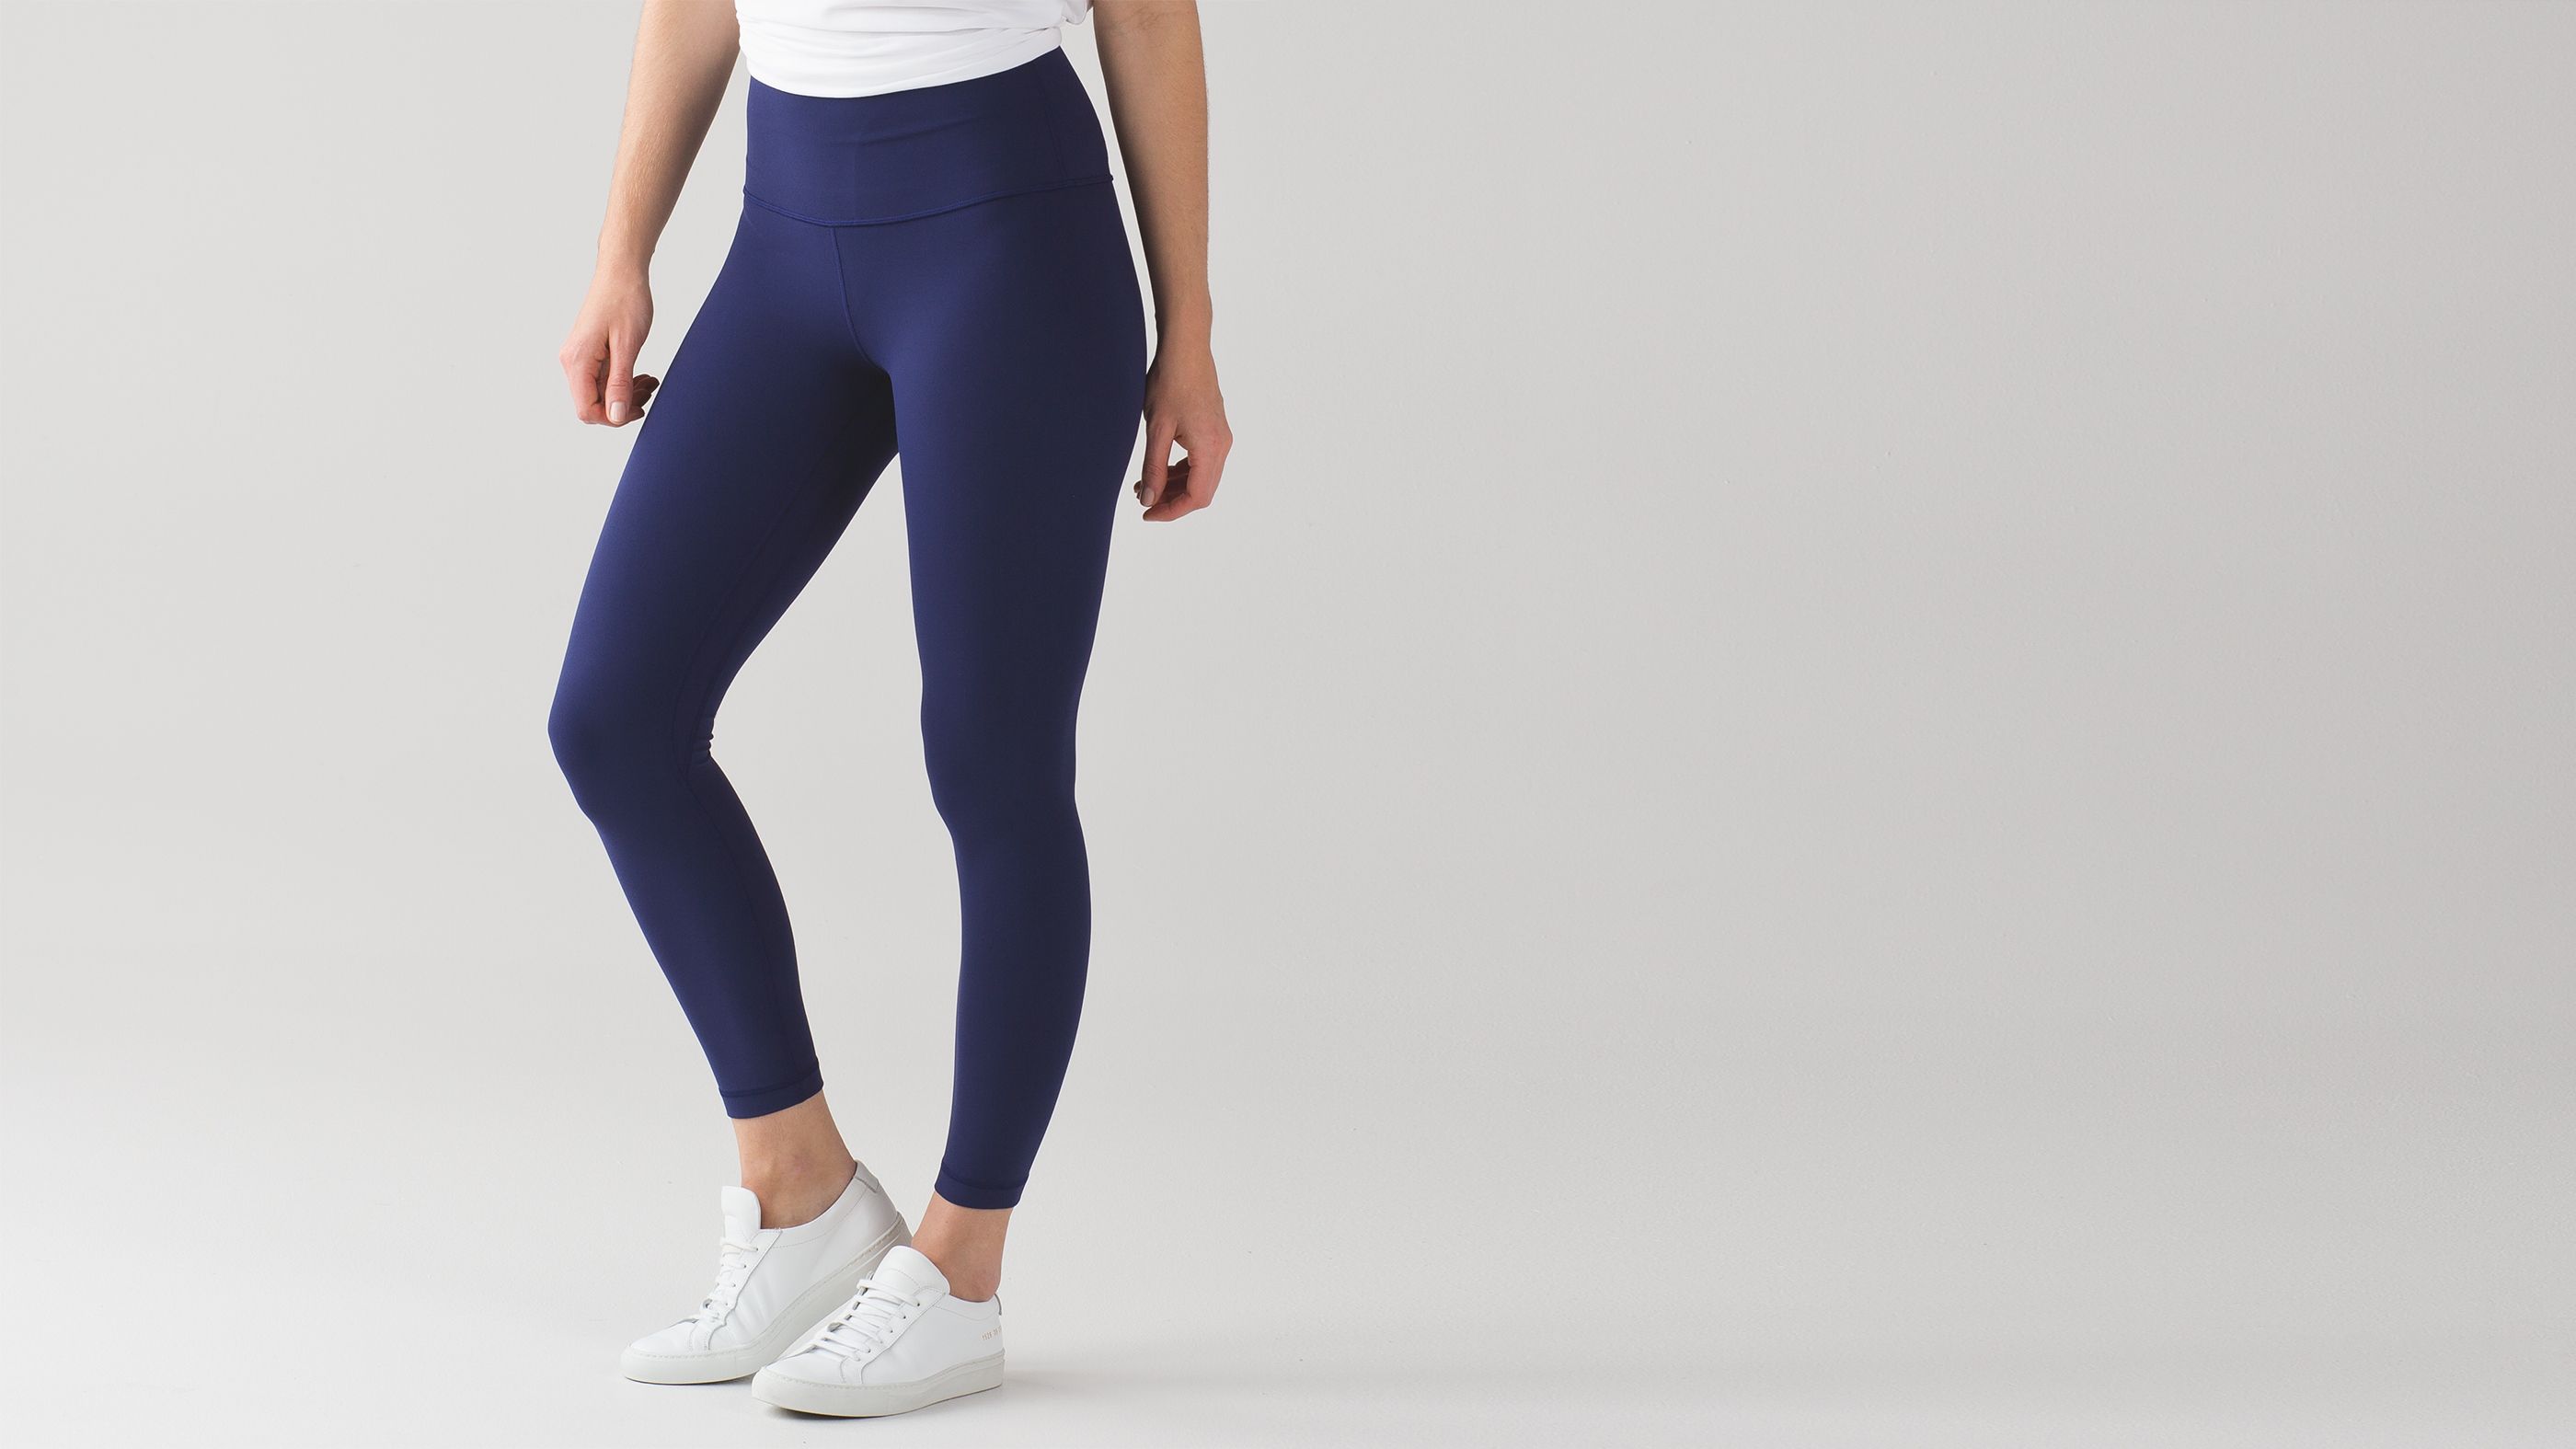 Lululemon leggings ruched ankle 25” - size 4 Black - $35 (70% Off Retail) -  From Cody